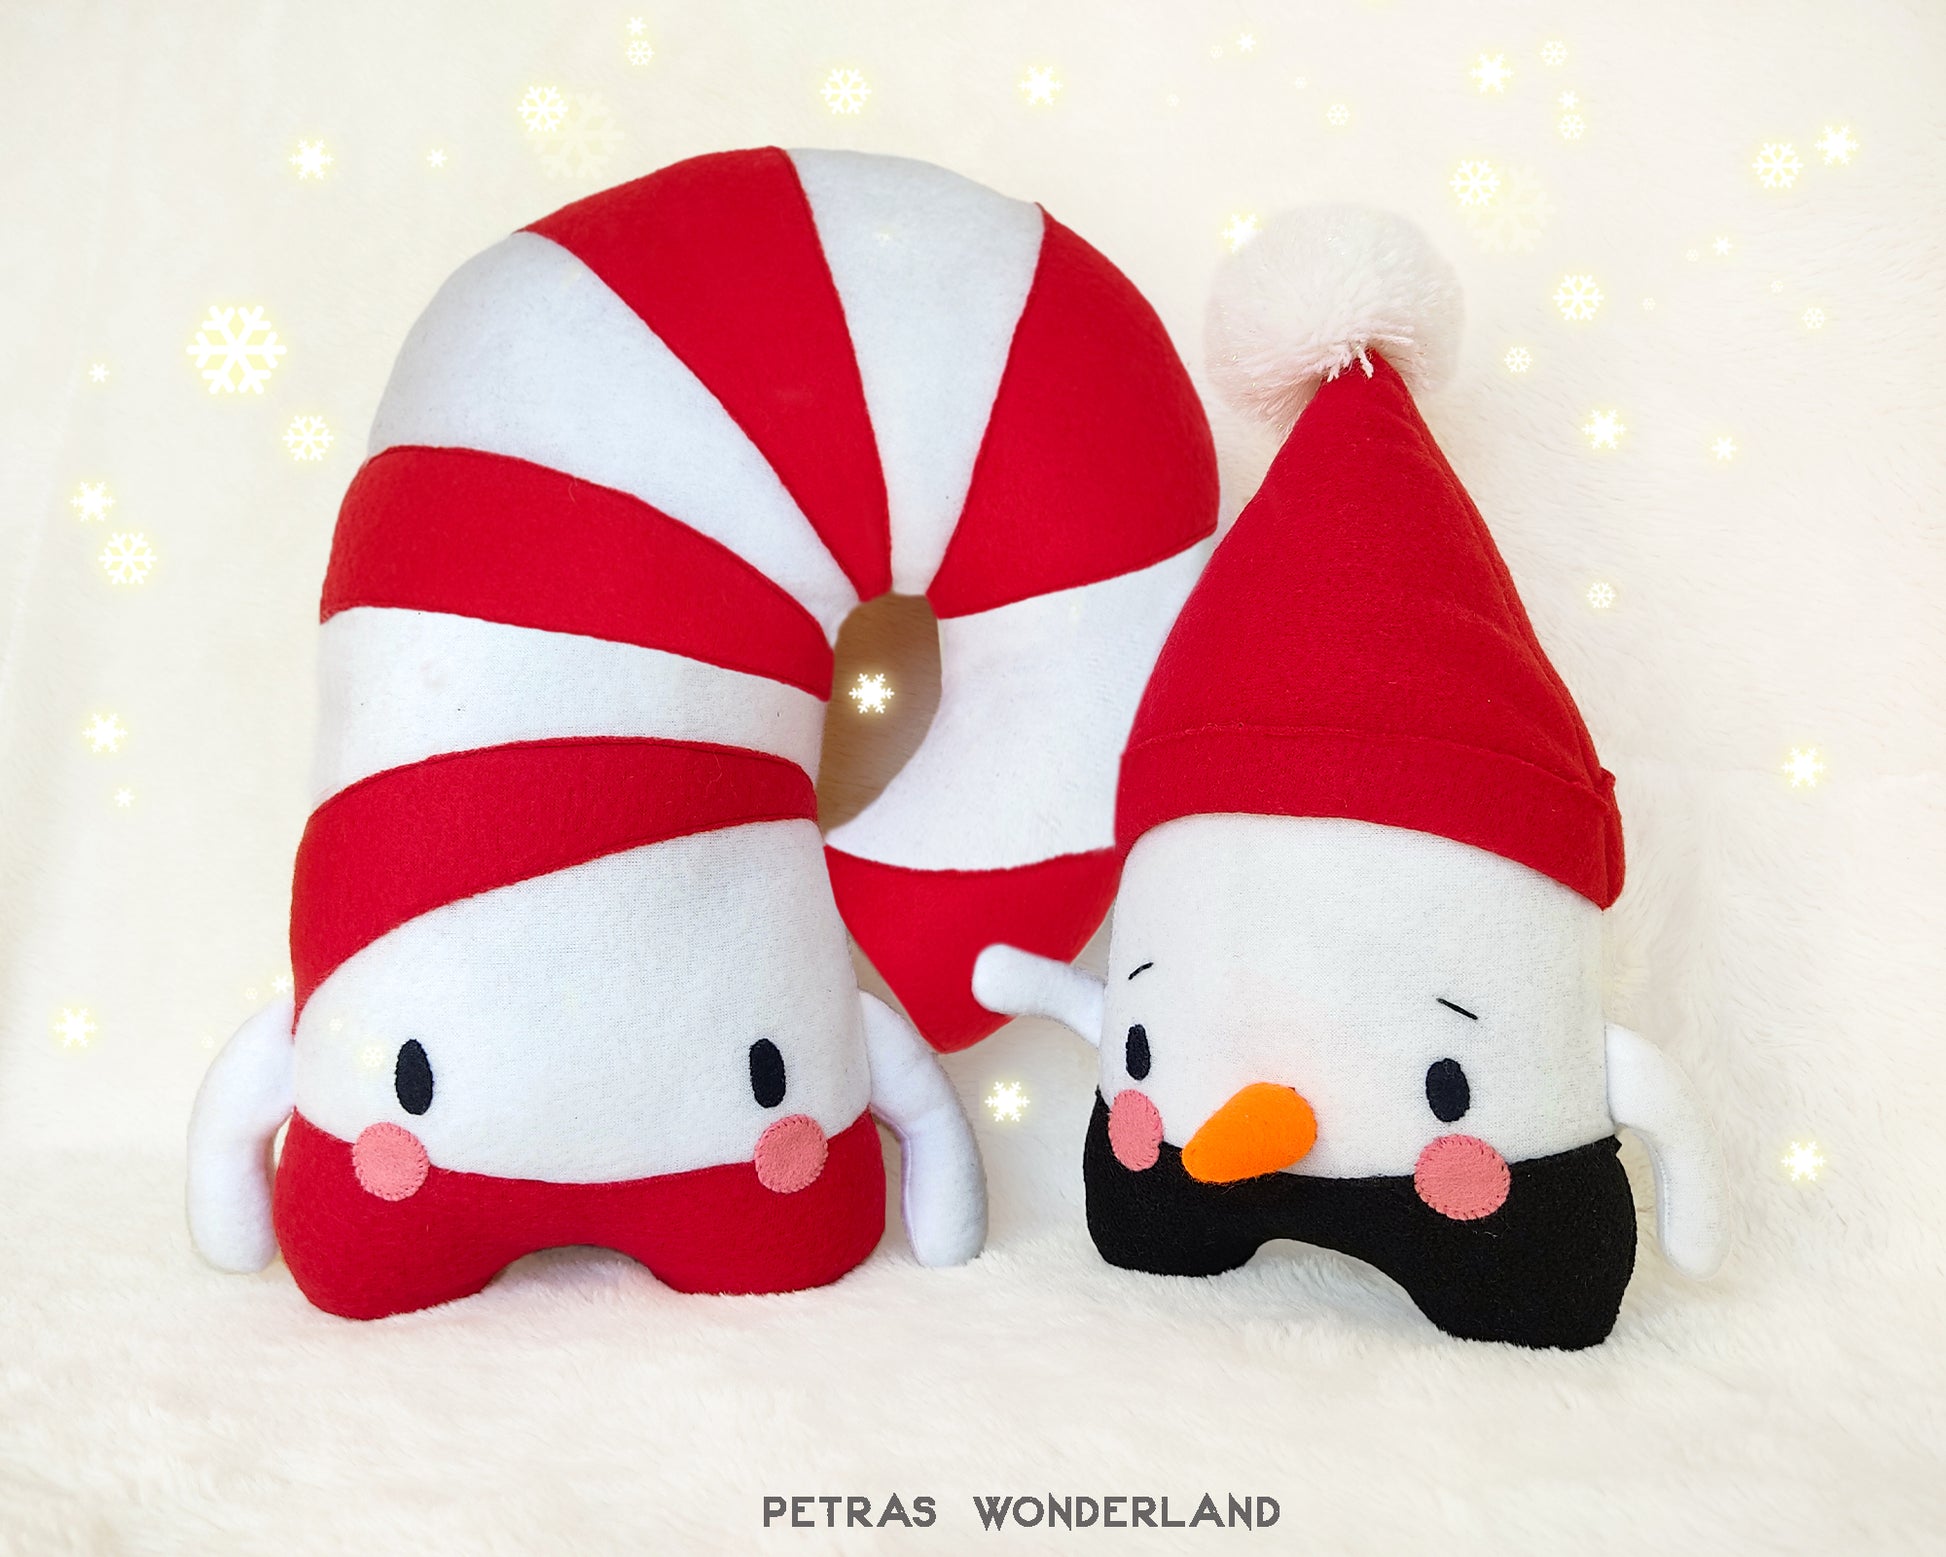 Christmas set of 2 patterns: Candy Stick Pillow and Snowman Toy - PDF toy sewing patterns and tutorials 06